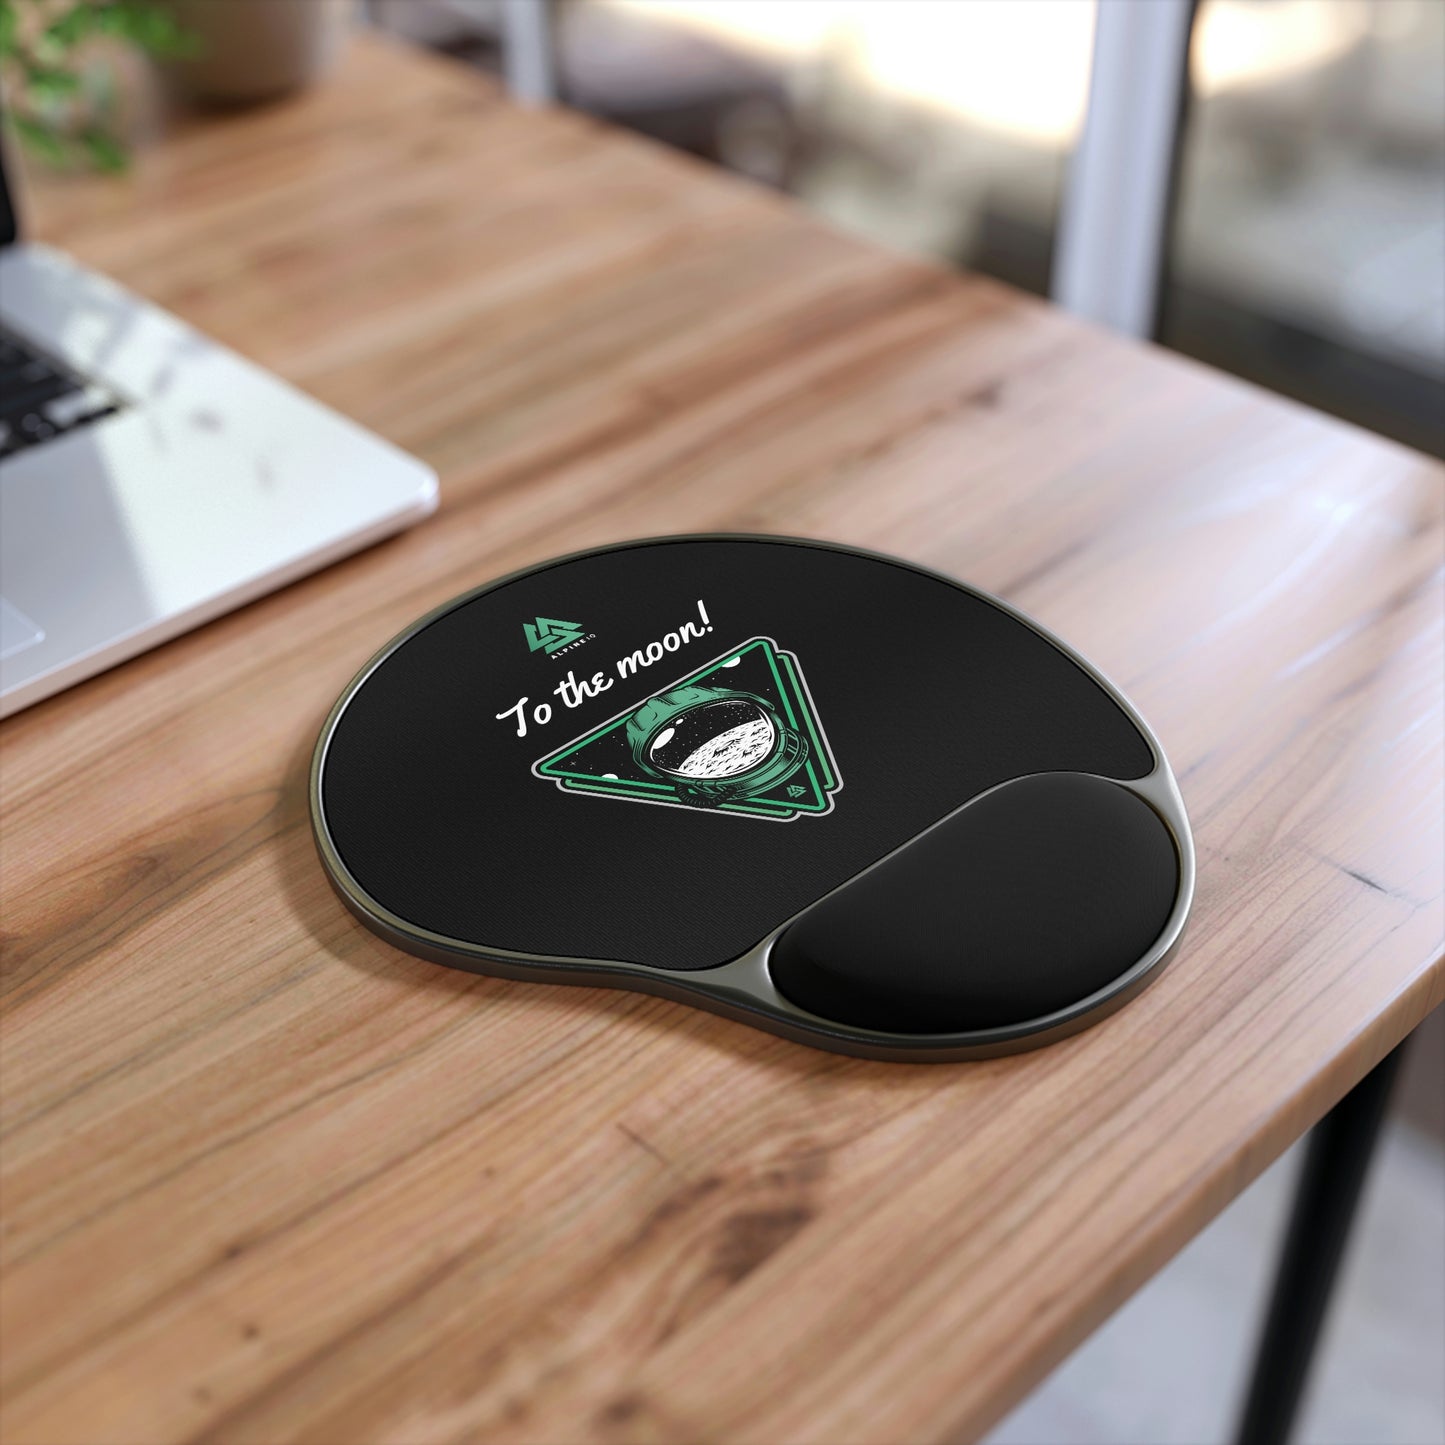 To The Moon - Alpine IQ Mouse Pad